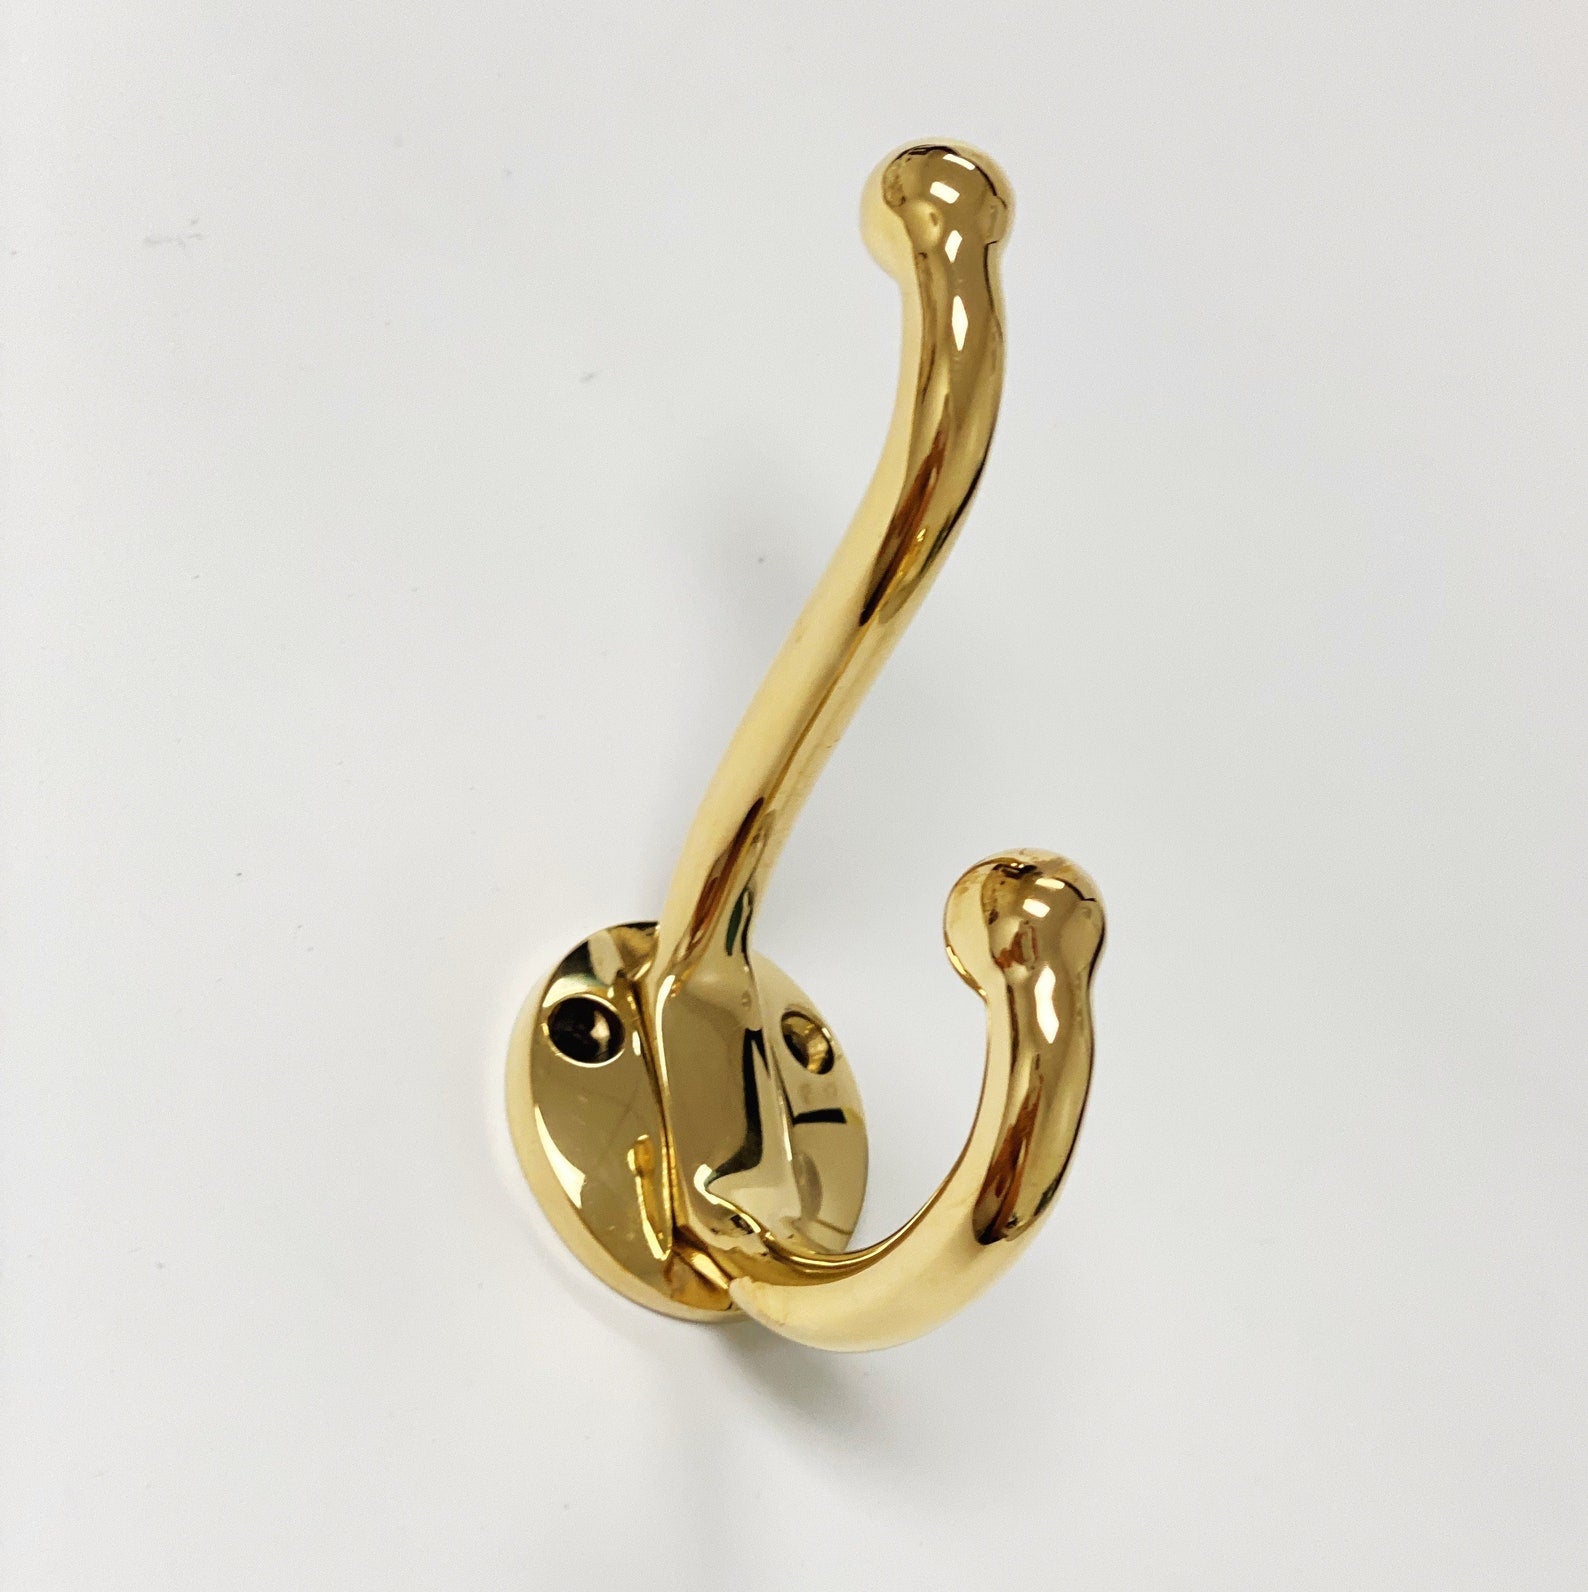 Polished Unlacquered Brass Heritage Wall Hook, Brass Wall Coat